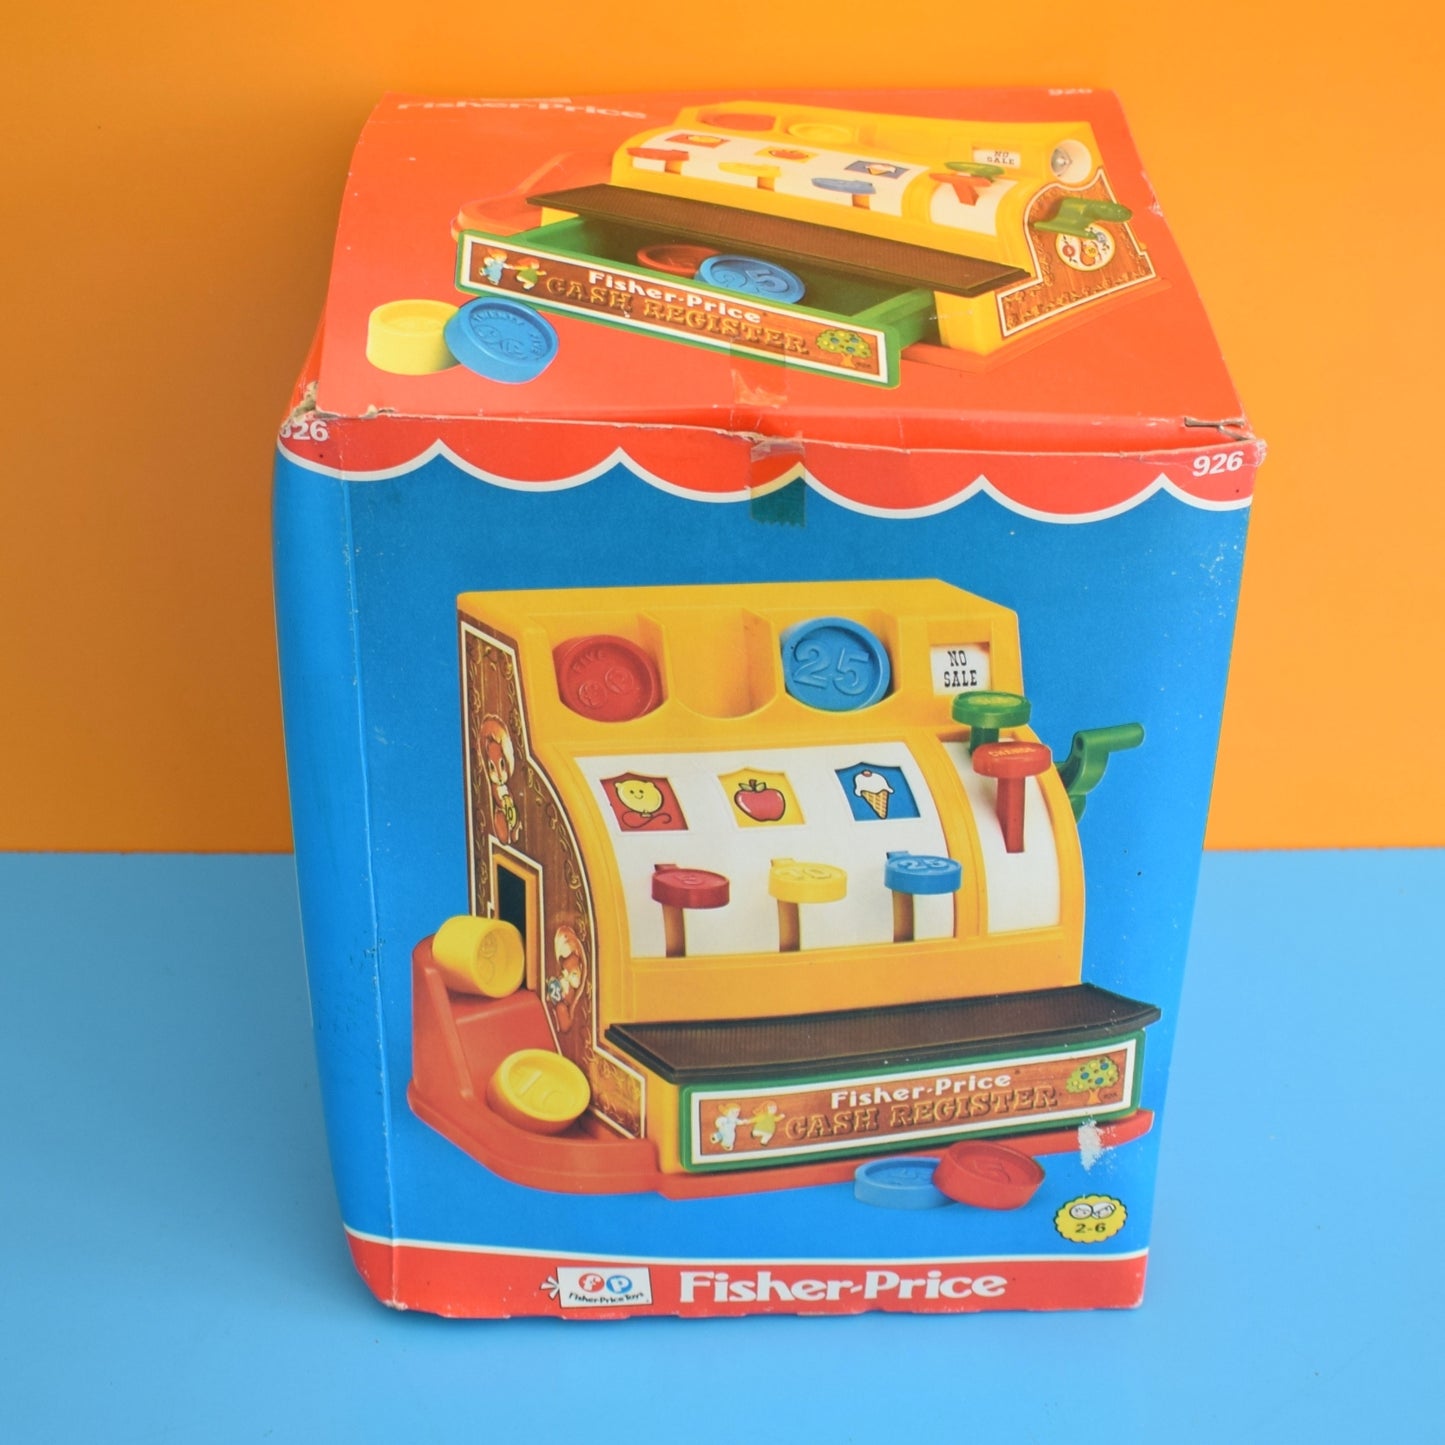 Vintage 1970s Fisher Price Play Till - Boxed